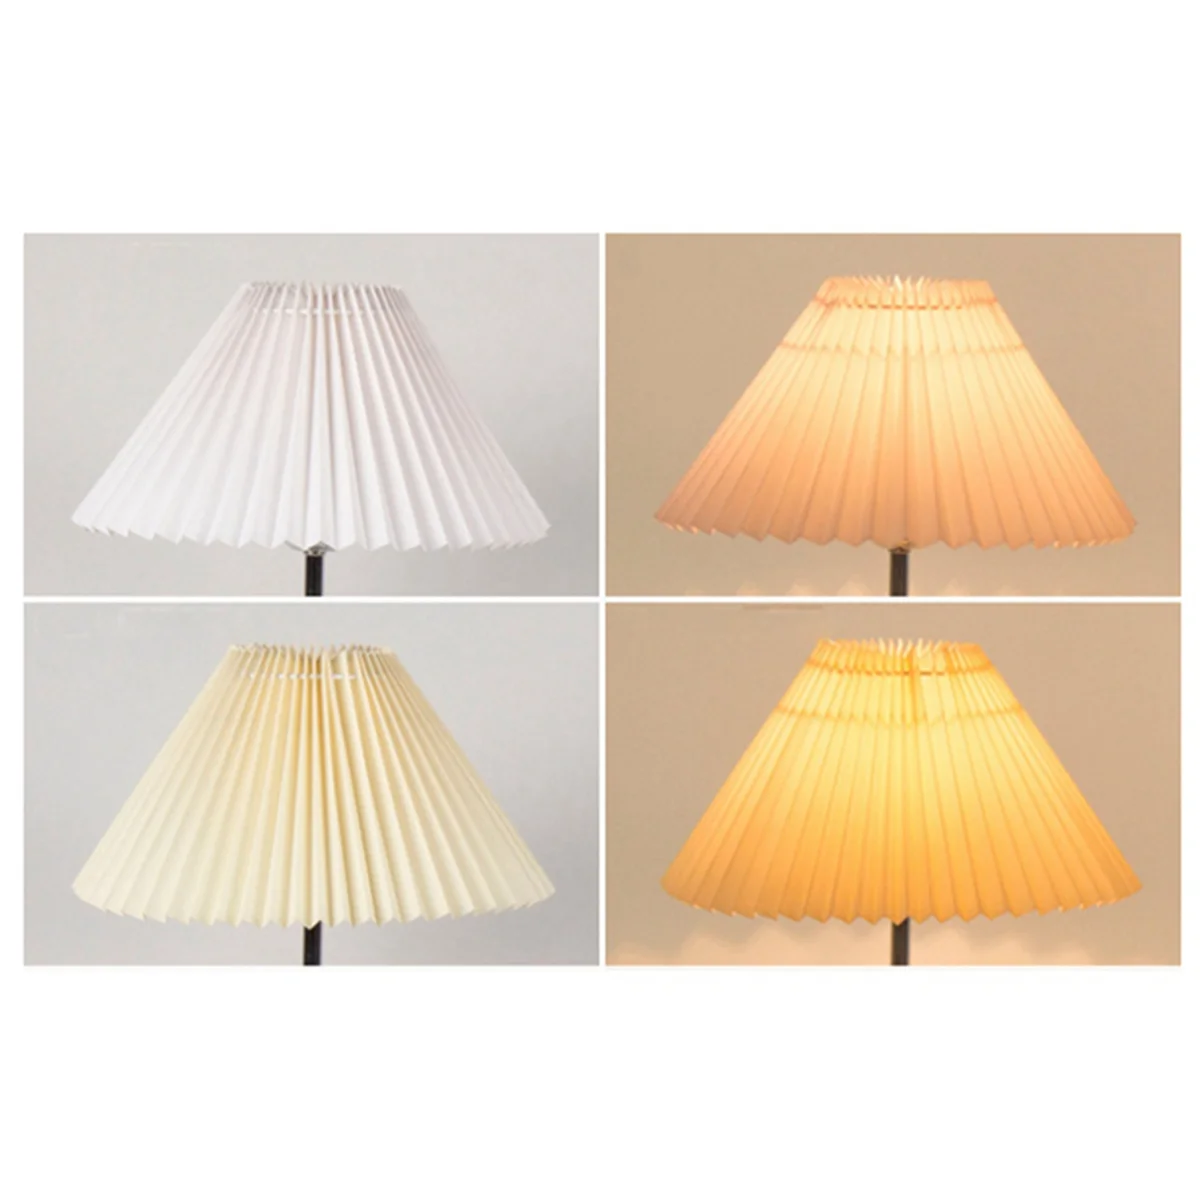 

3X Pleats Lampshade Table Lamp Standing Lamps Japanese Style Pleated Lampshade Creative Desk Lamp Shade Bedroom Lamps -A